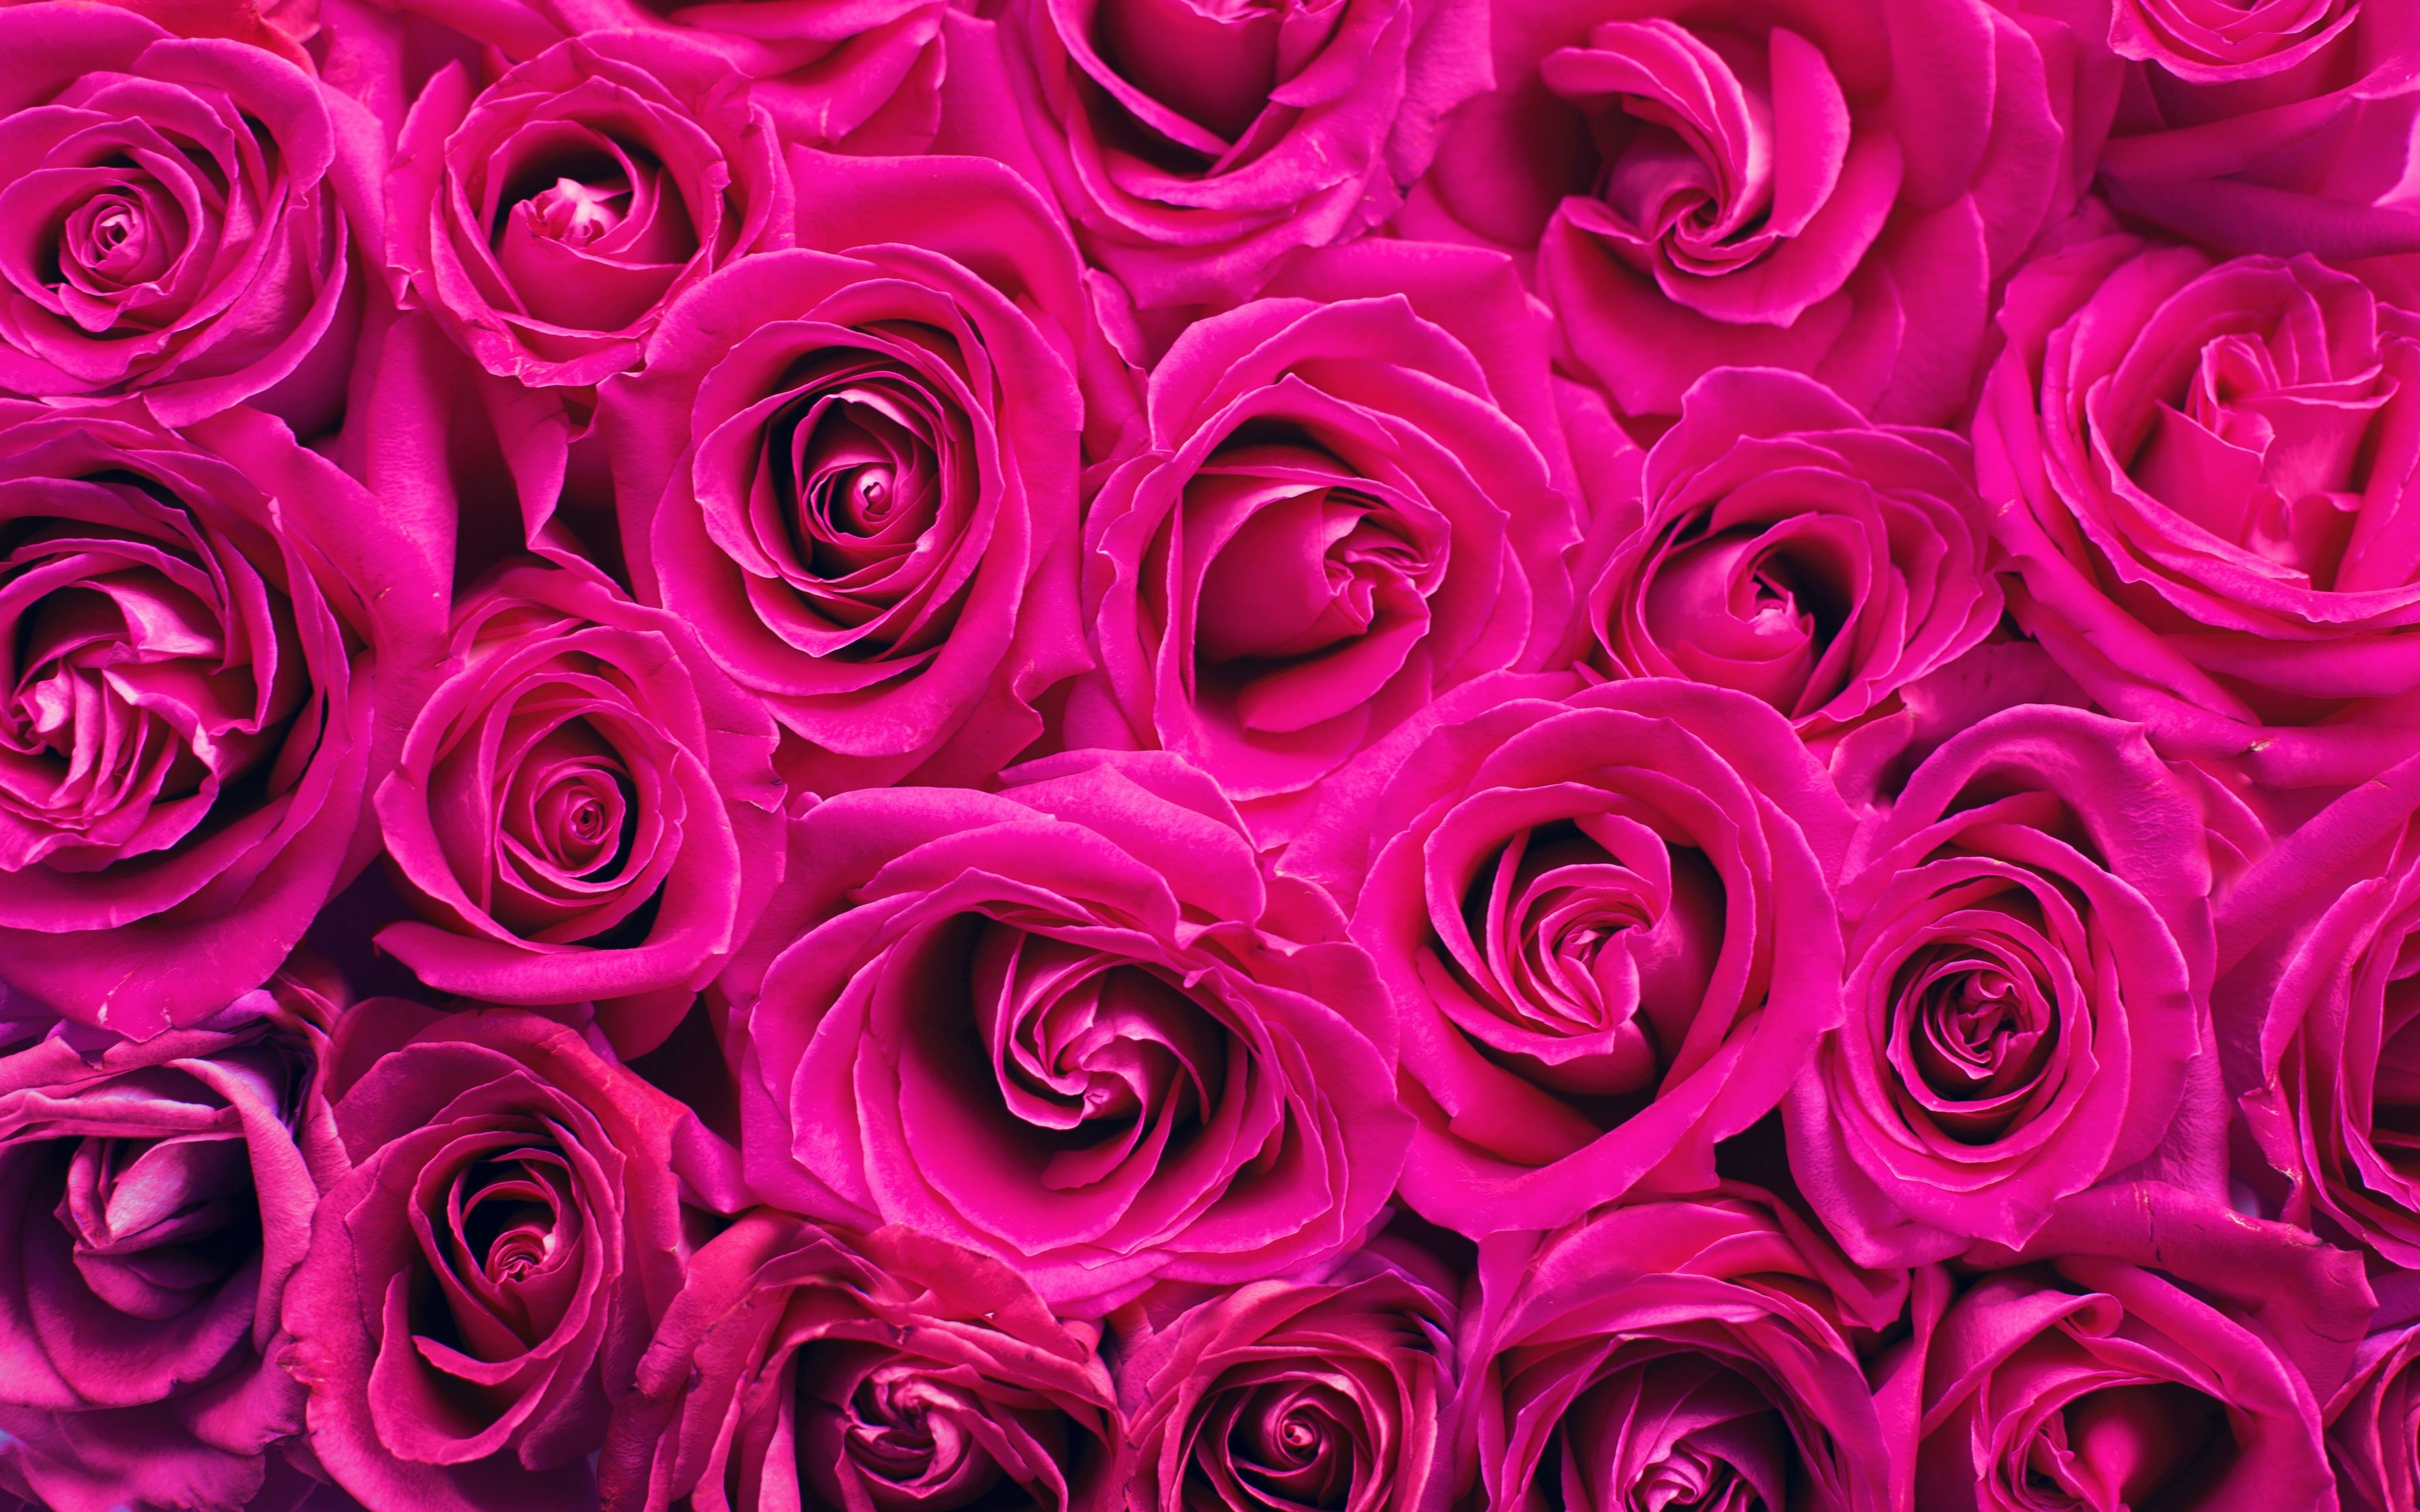 Download wallpaper 3840x2400 roses, bouquet, pink, buds, flowers